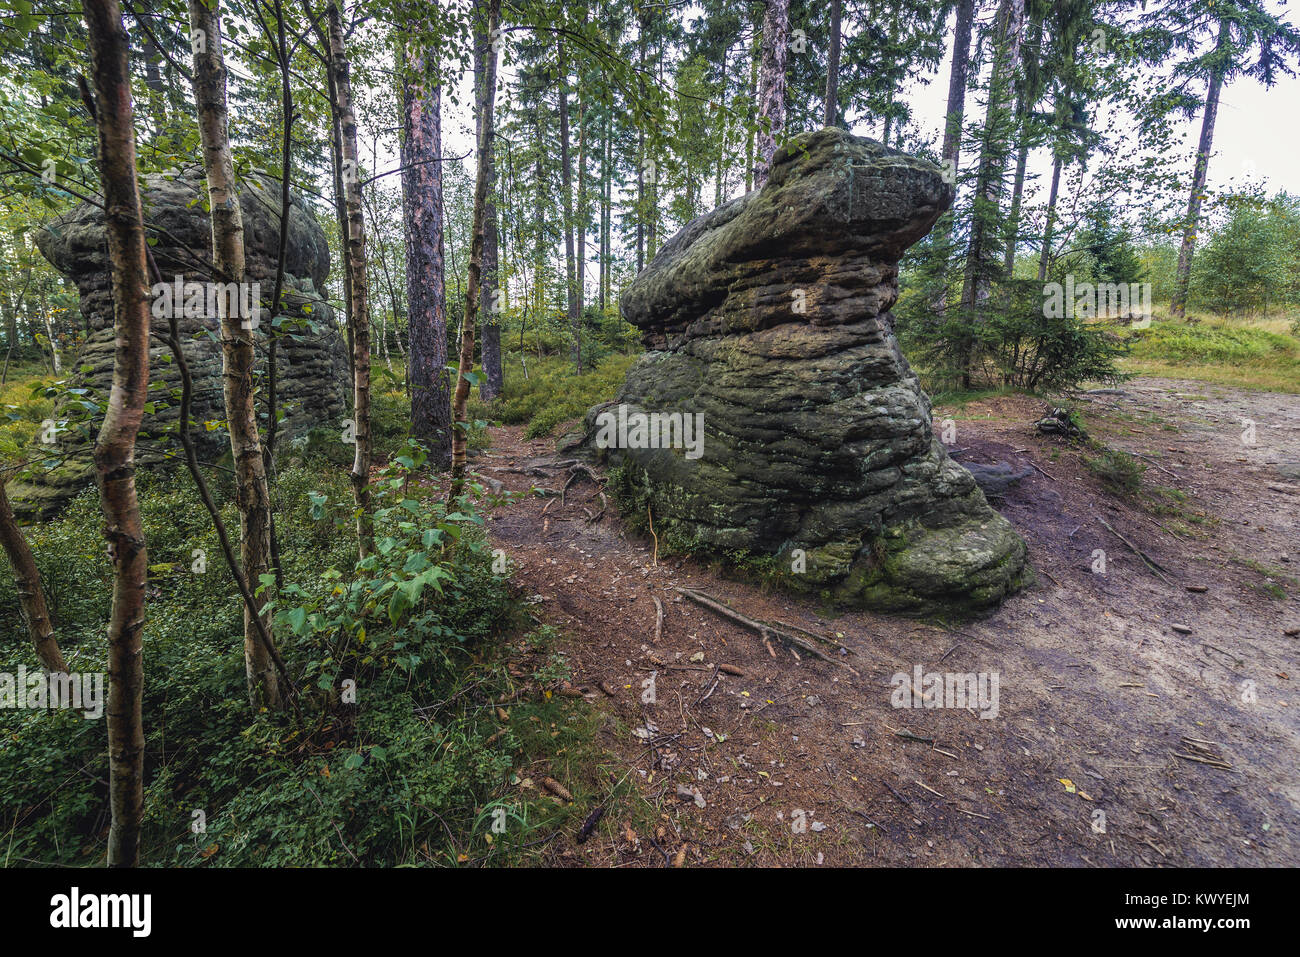 Stone Mushrooms rock formation in Broumovske steny (Broumov Walls) mountain range and nature reserve, part of Table Mountains in Czech Republic Stock Photo